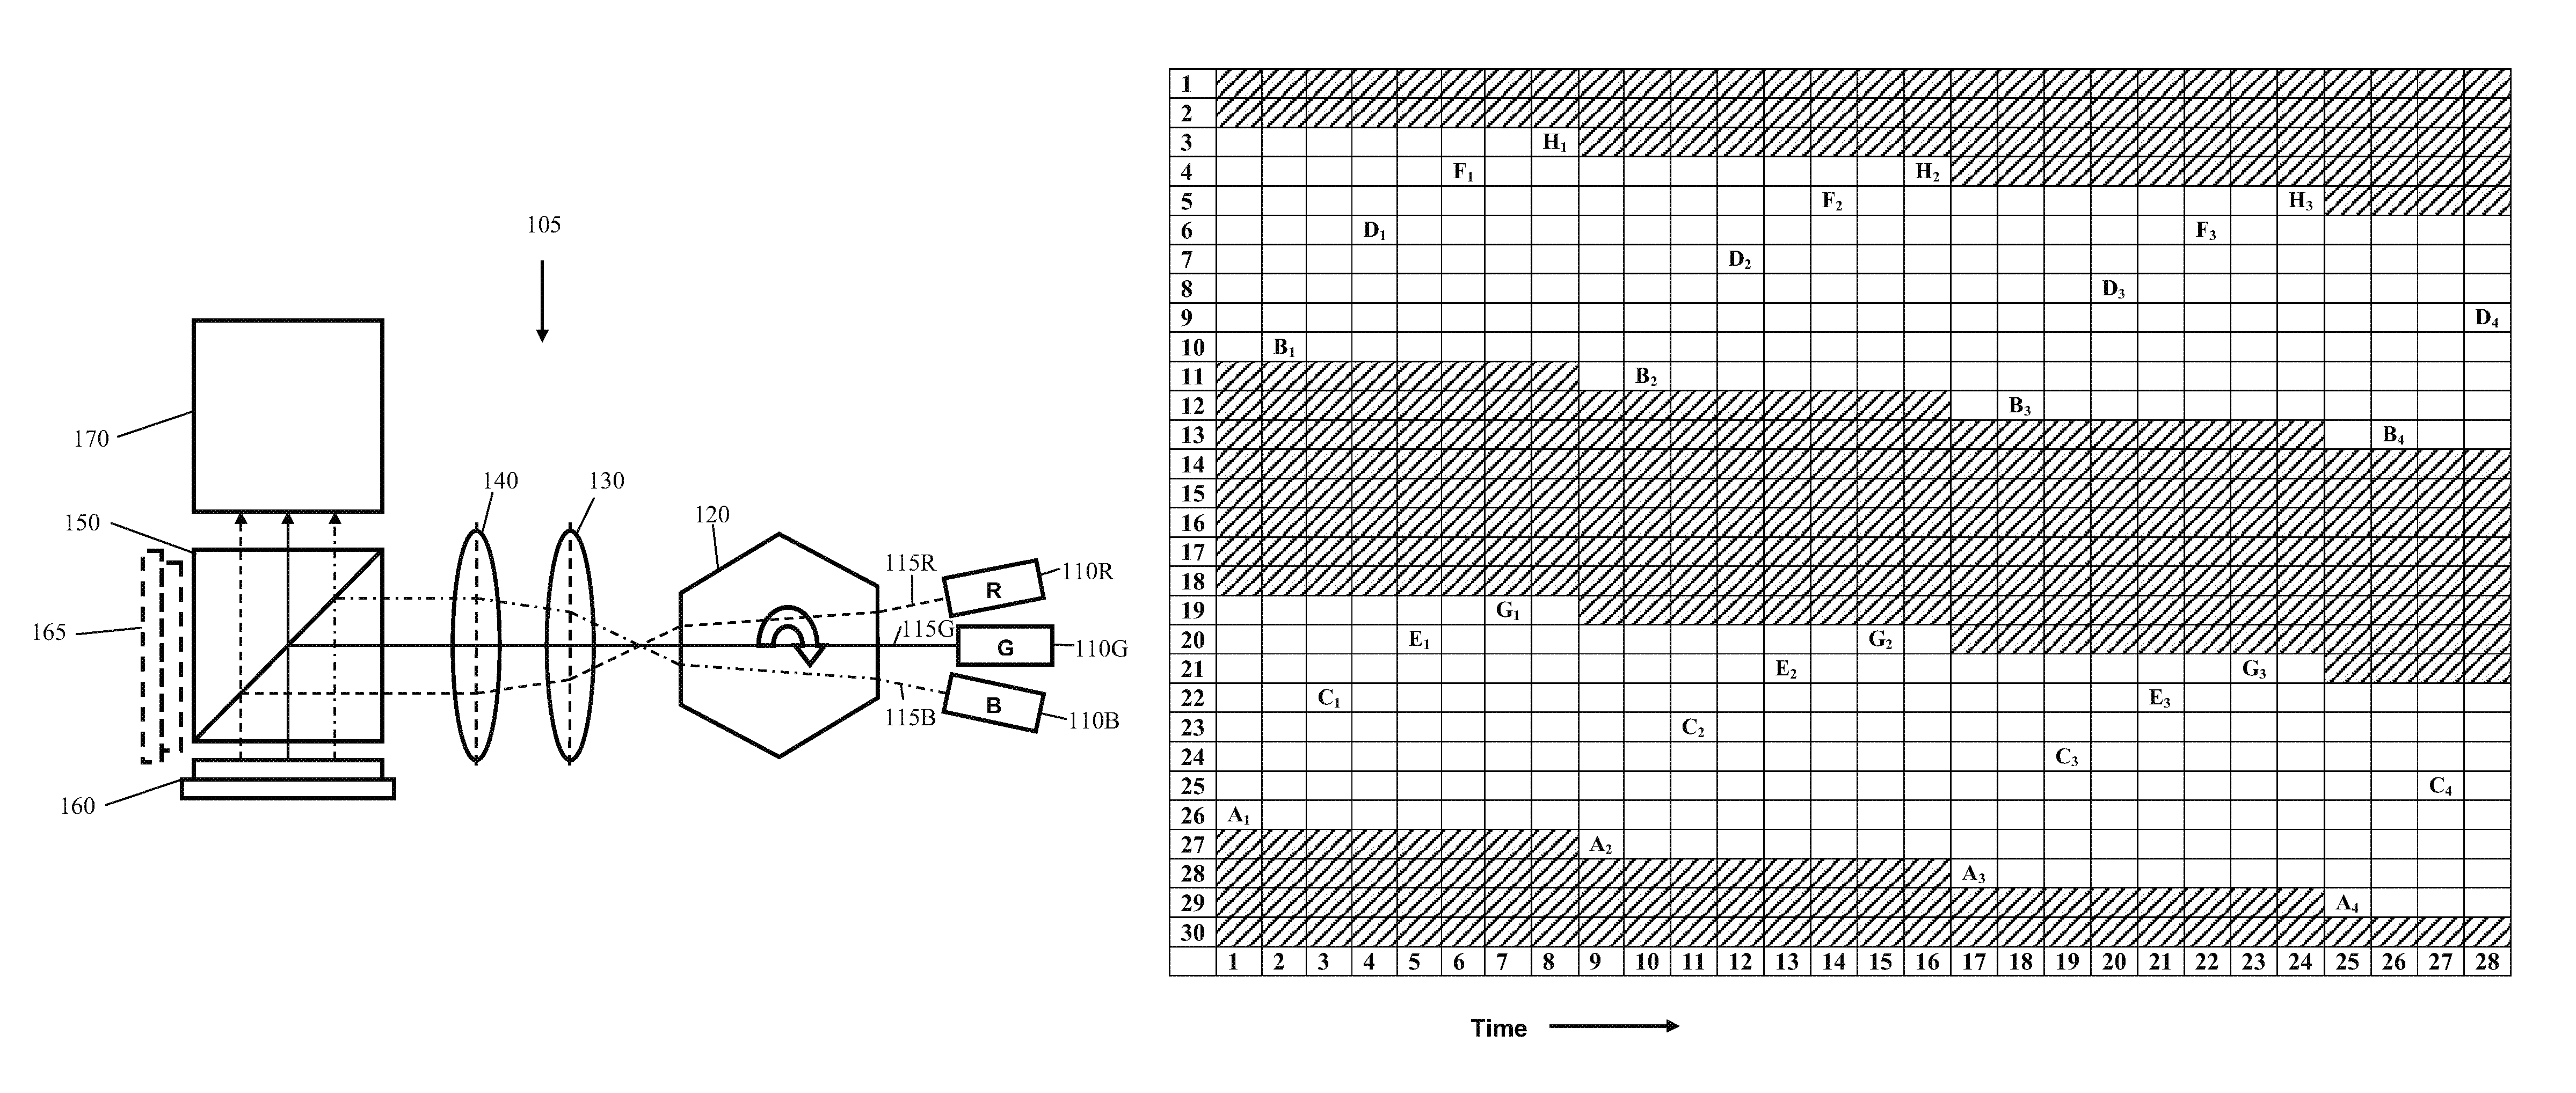 System and method for pulse width modulating a scrolling color display